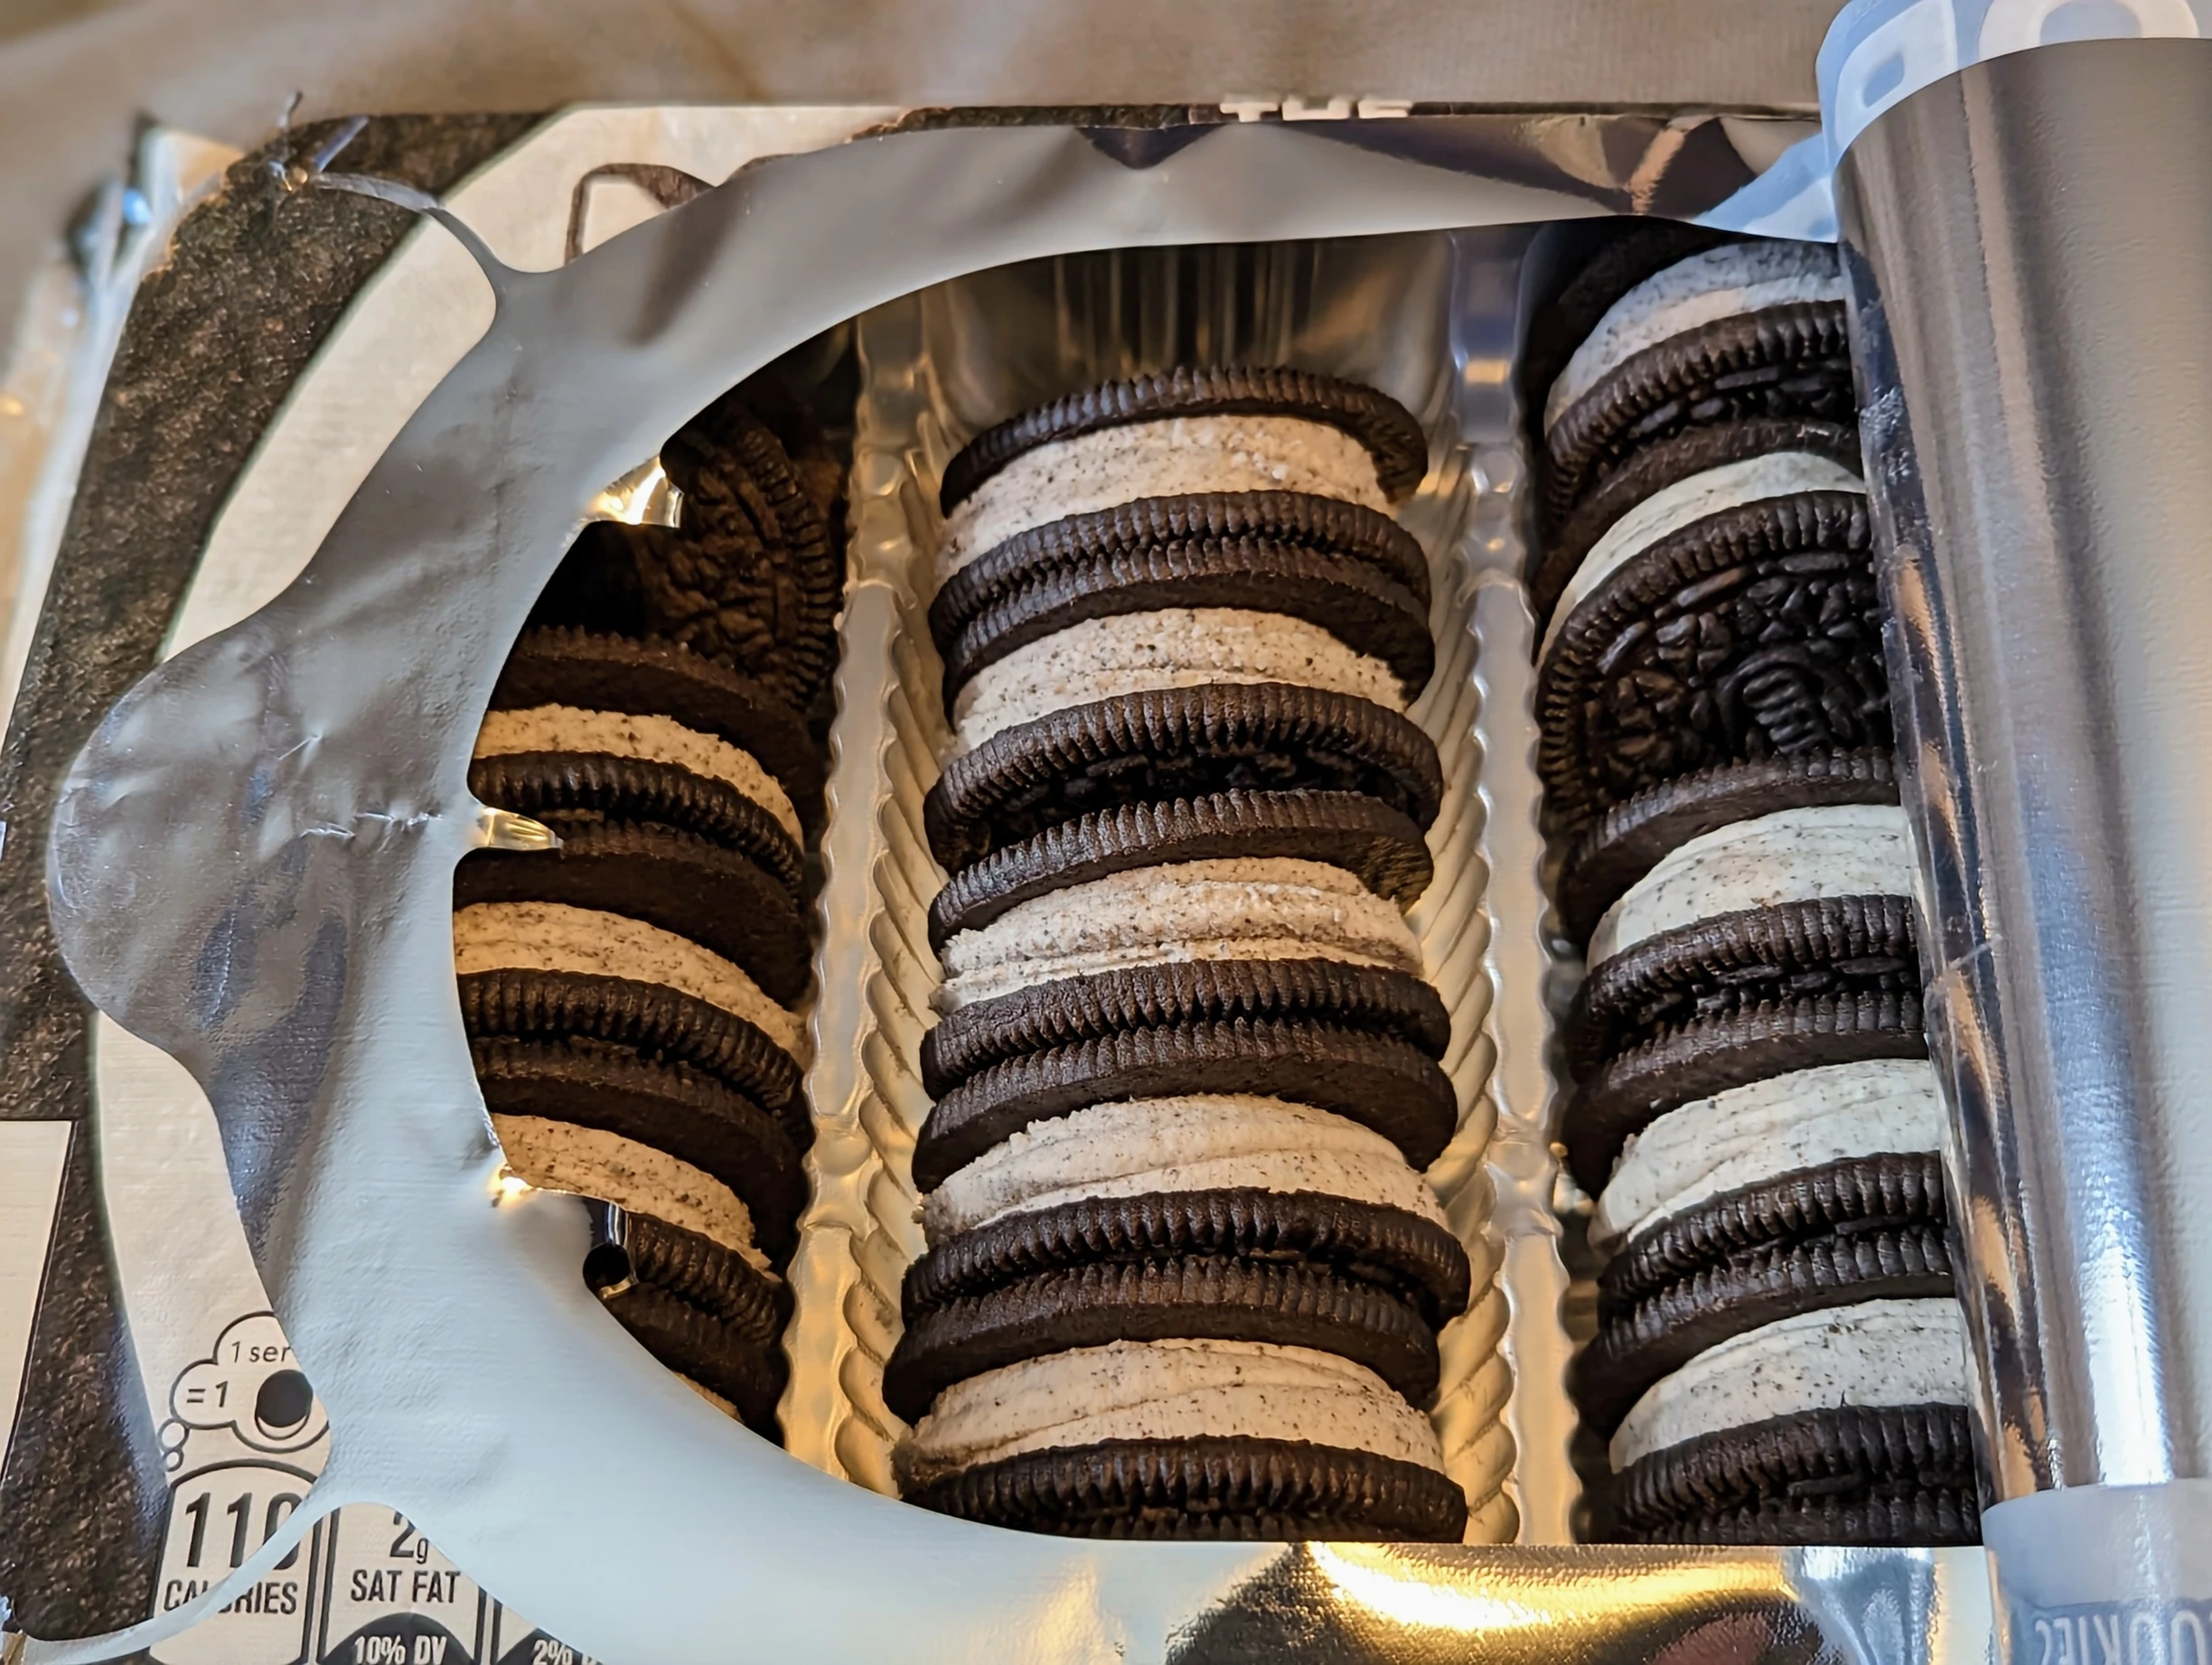 Rows of these Limited Edition Oreos in a package.